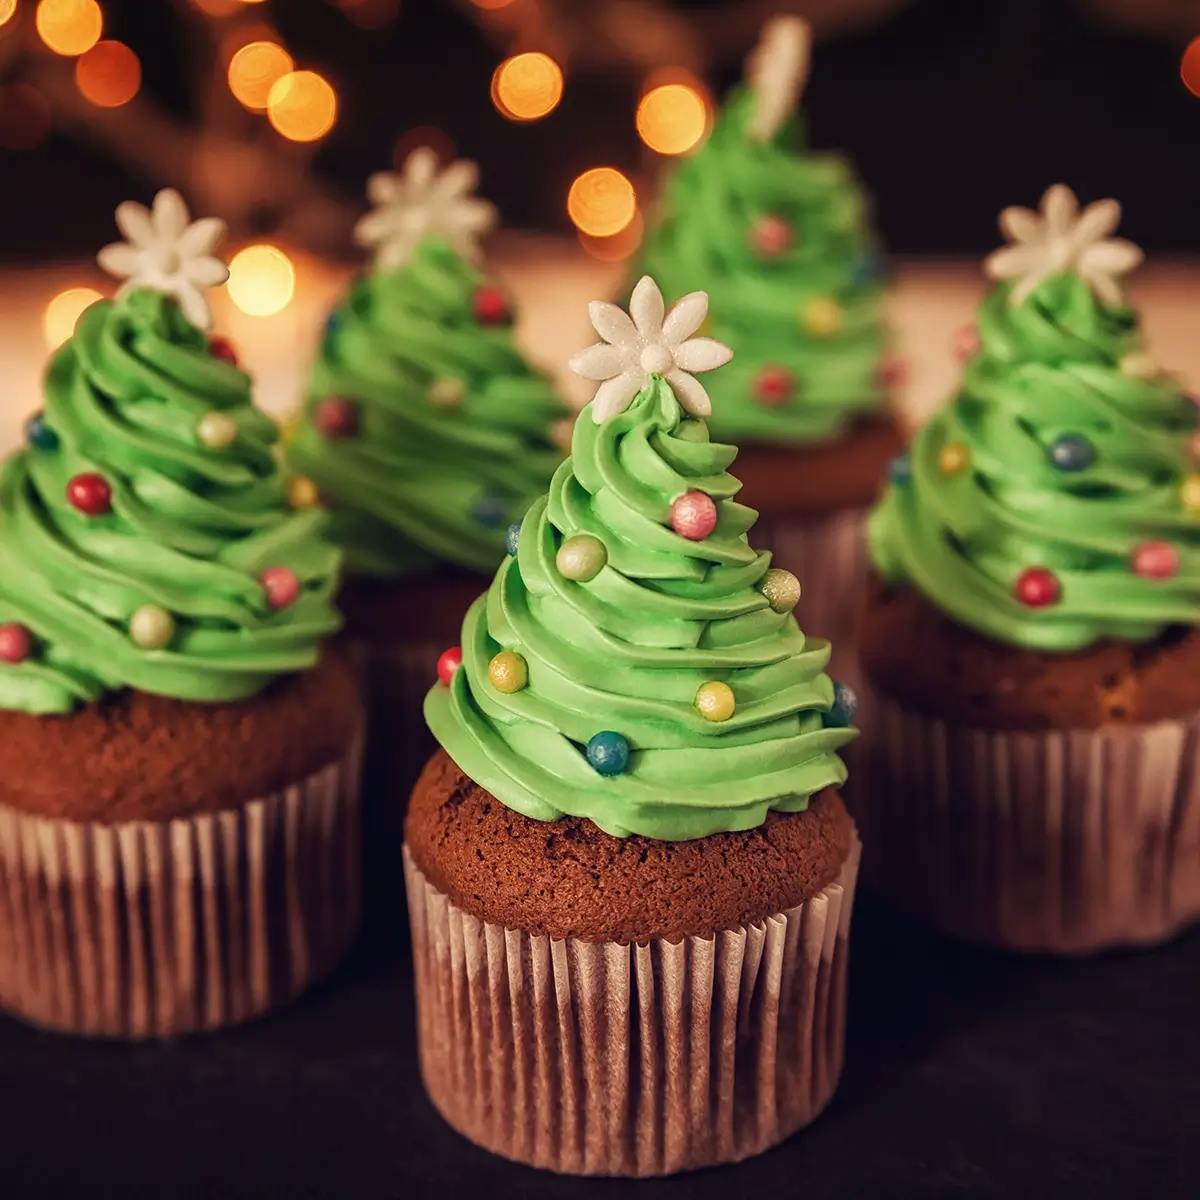 Chocolate cupcakes with green frosting shaped like Christmas trees.